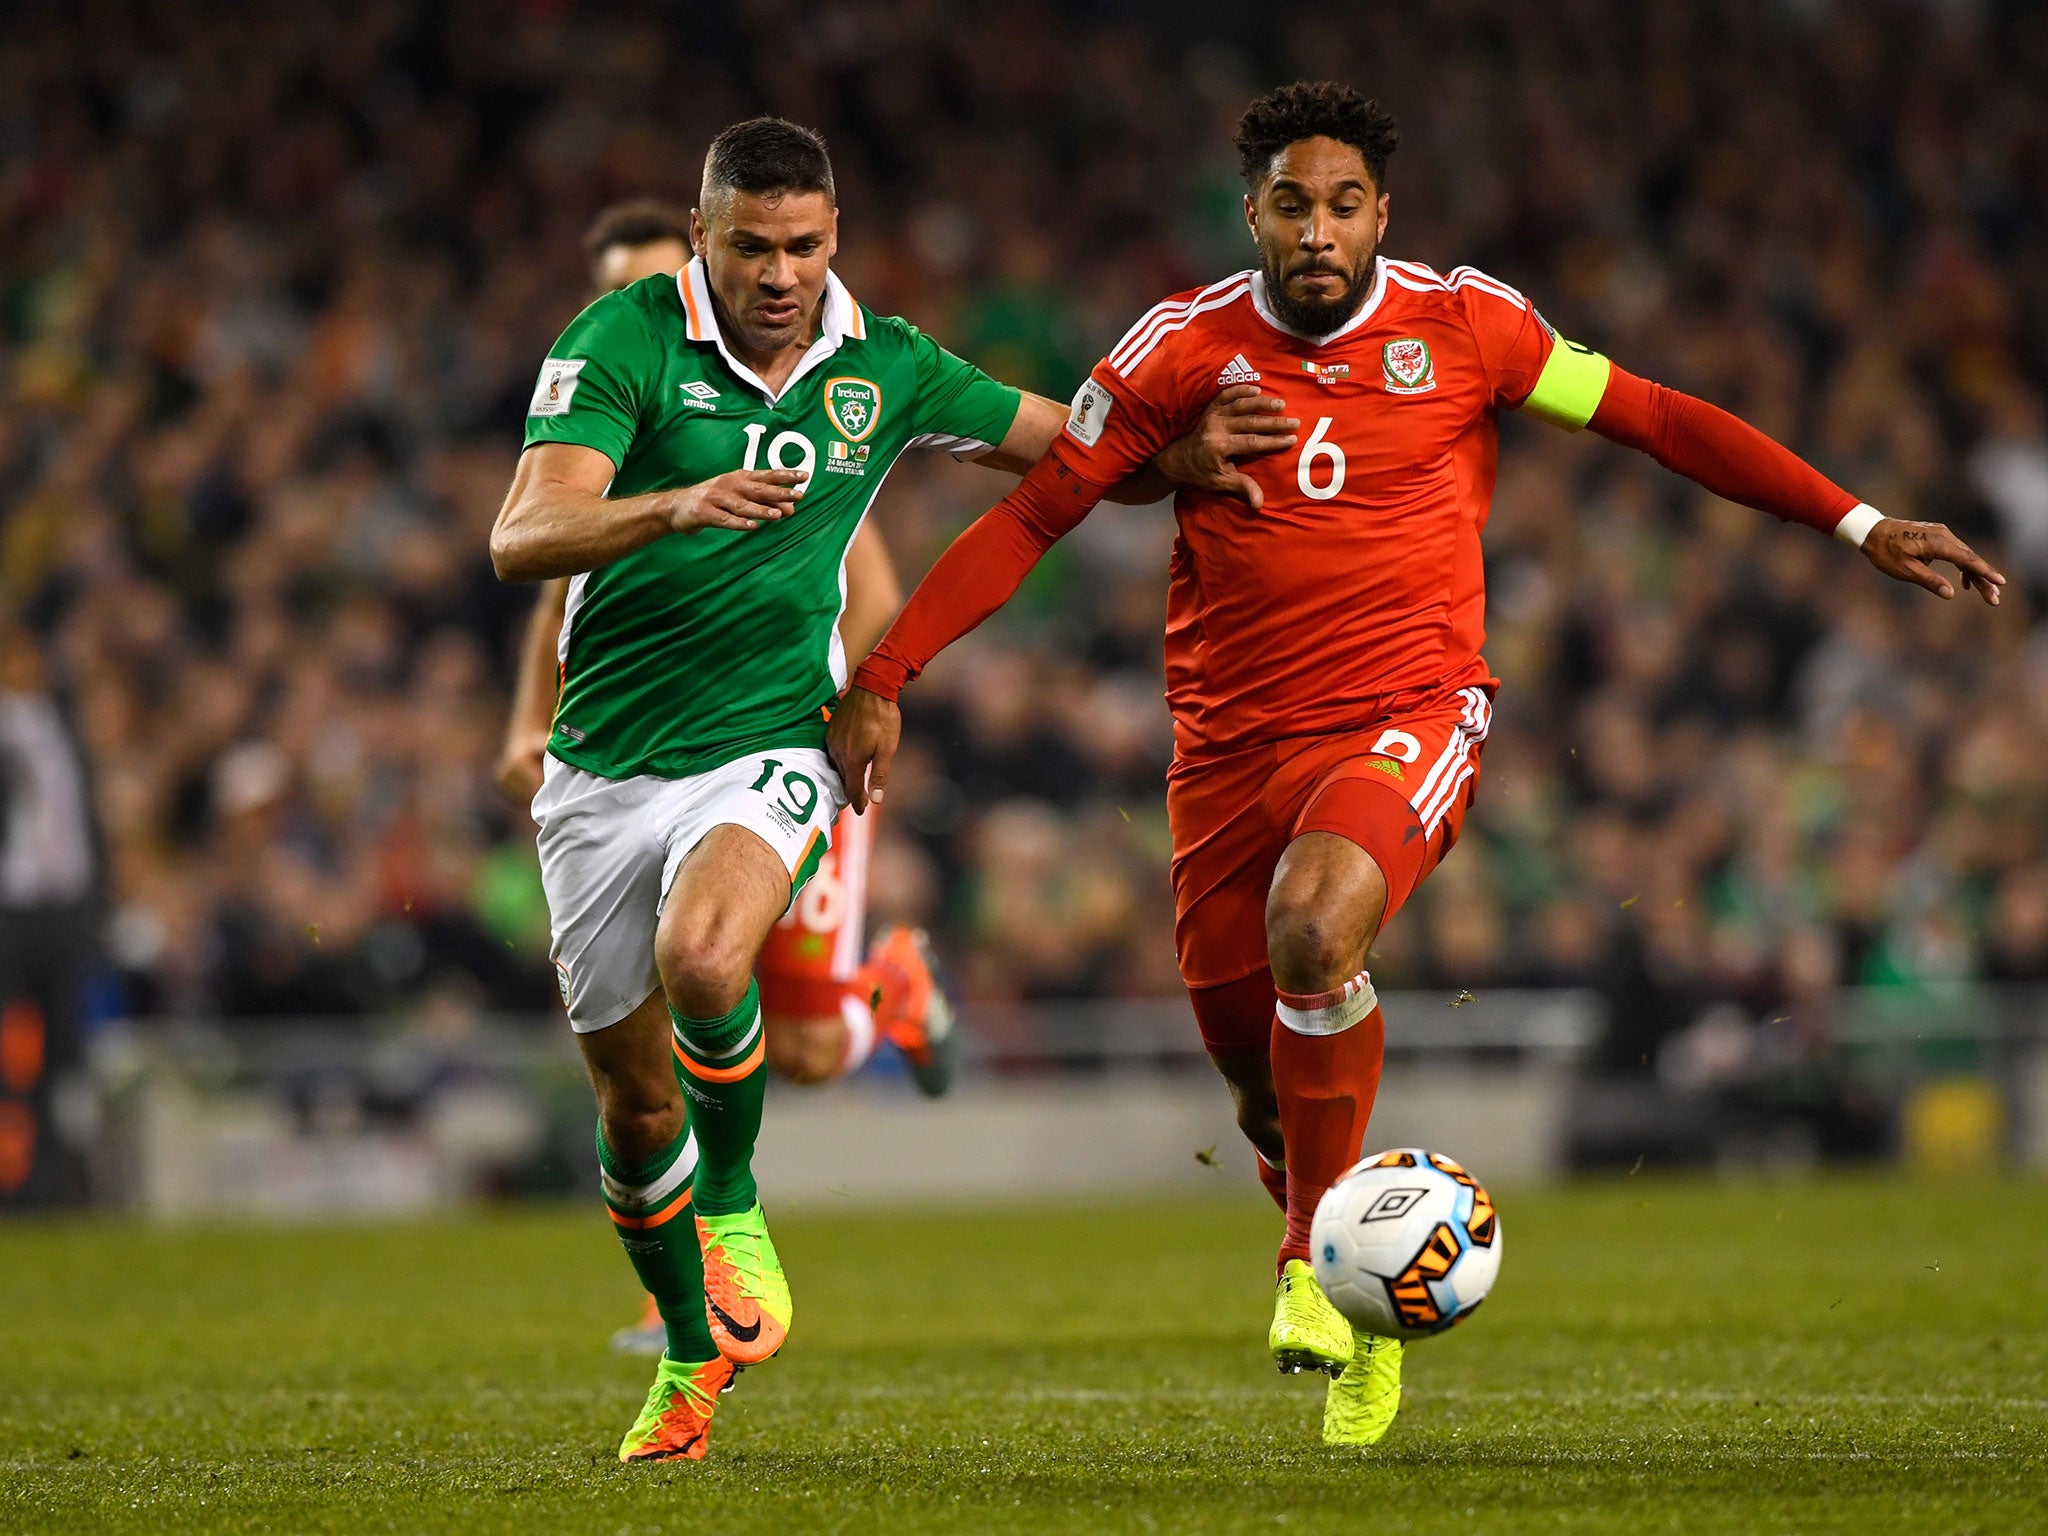 Wales and Republic of Ireland meet in a crunch World Cup qualifier